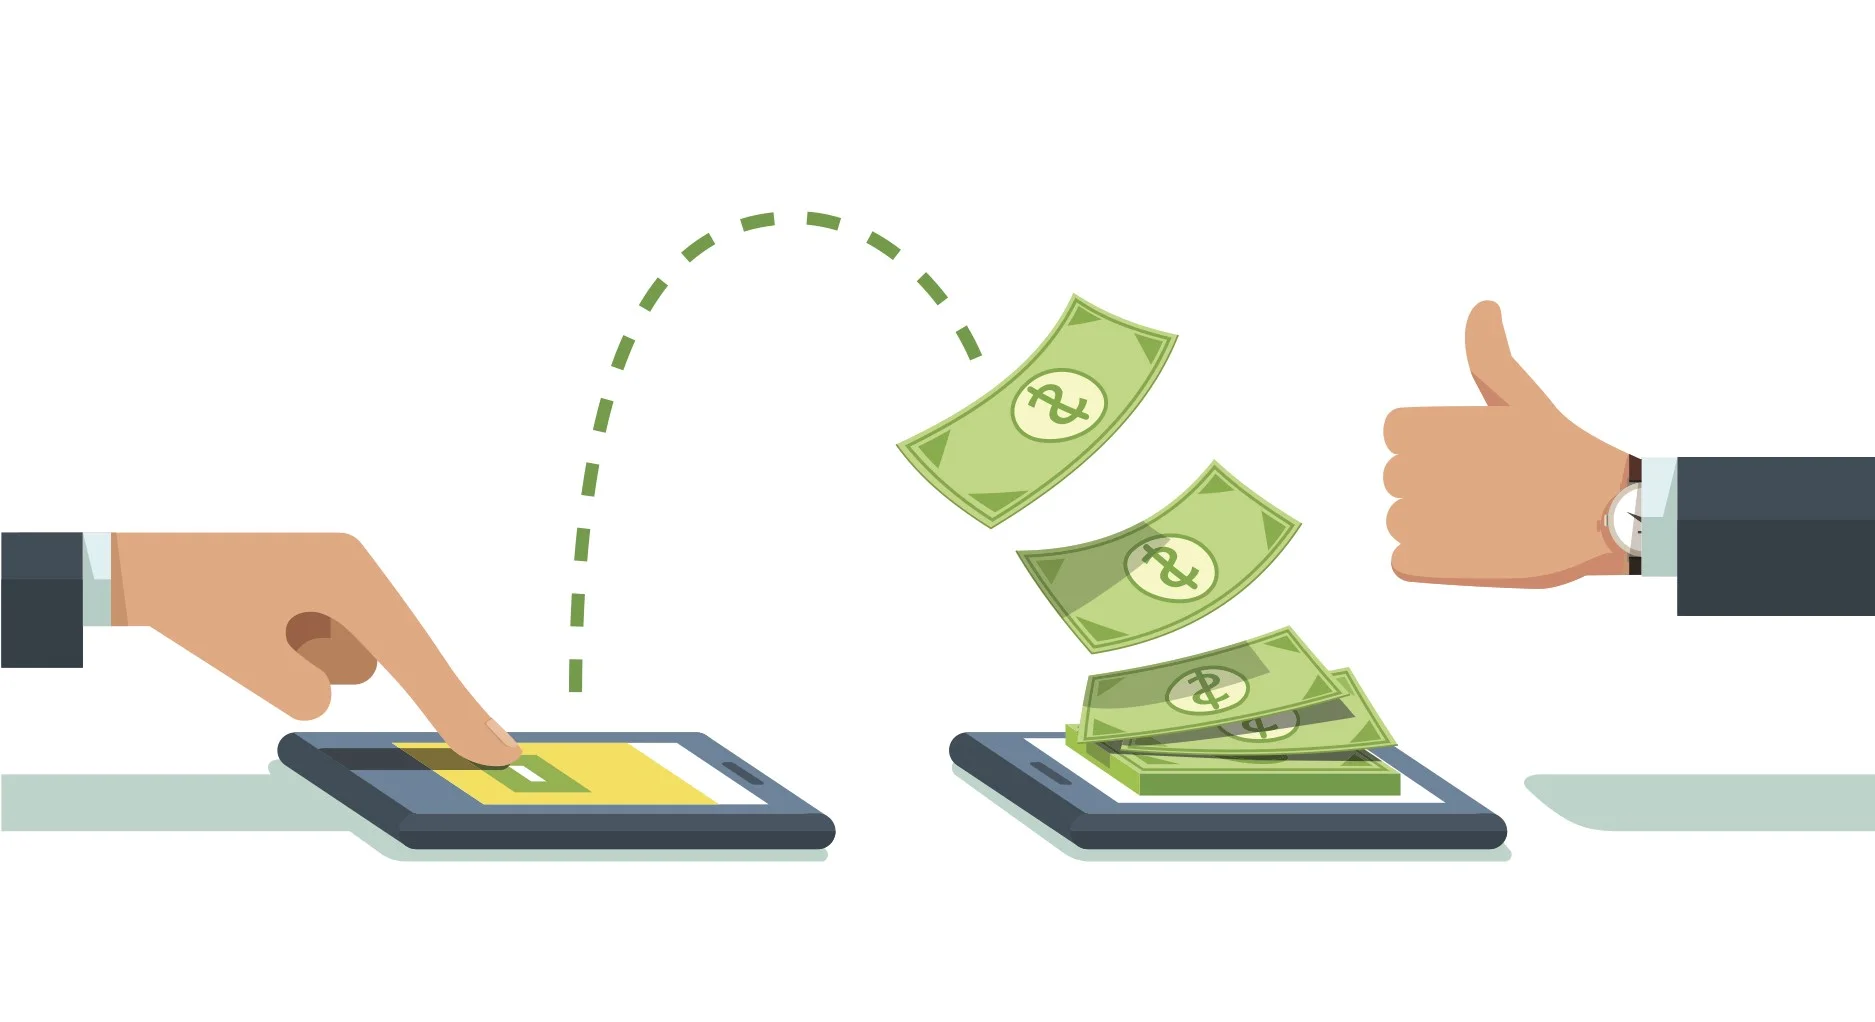 A graphic illustration showing a hand pressing a button on a tablet, resulting in money flying out and landing on another tablet, with another hand giving a thumbs up, symbolizing the profitable outcome of an online business strategy